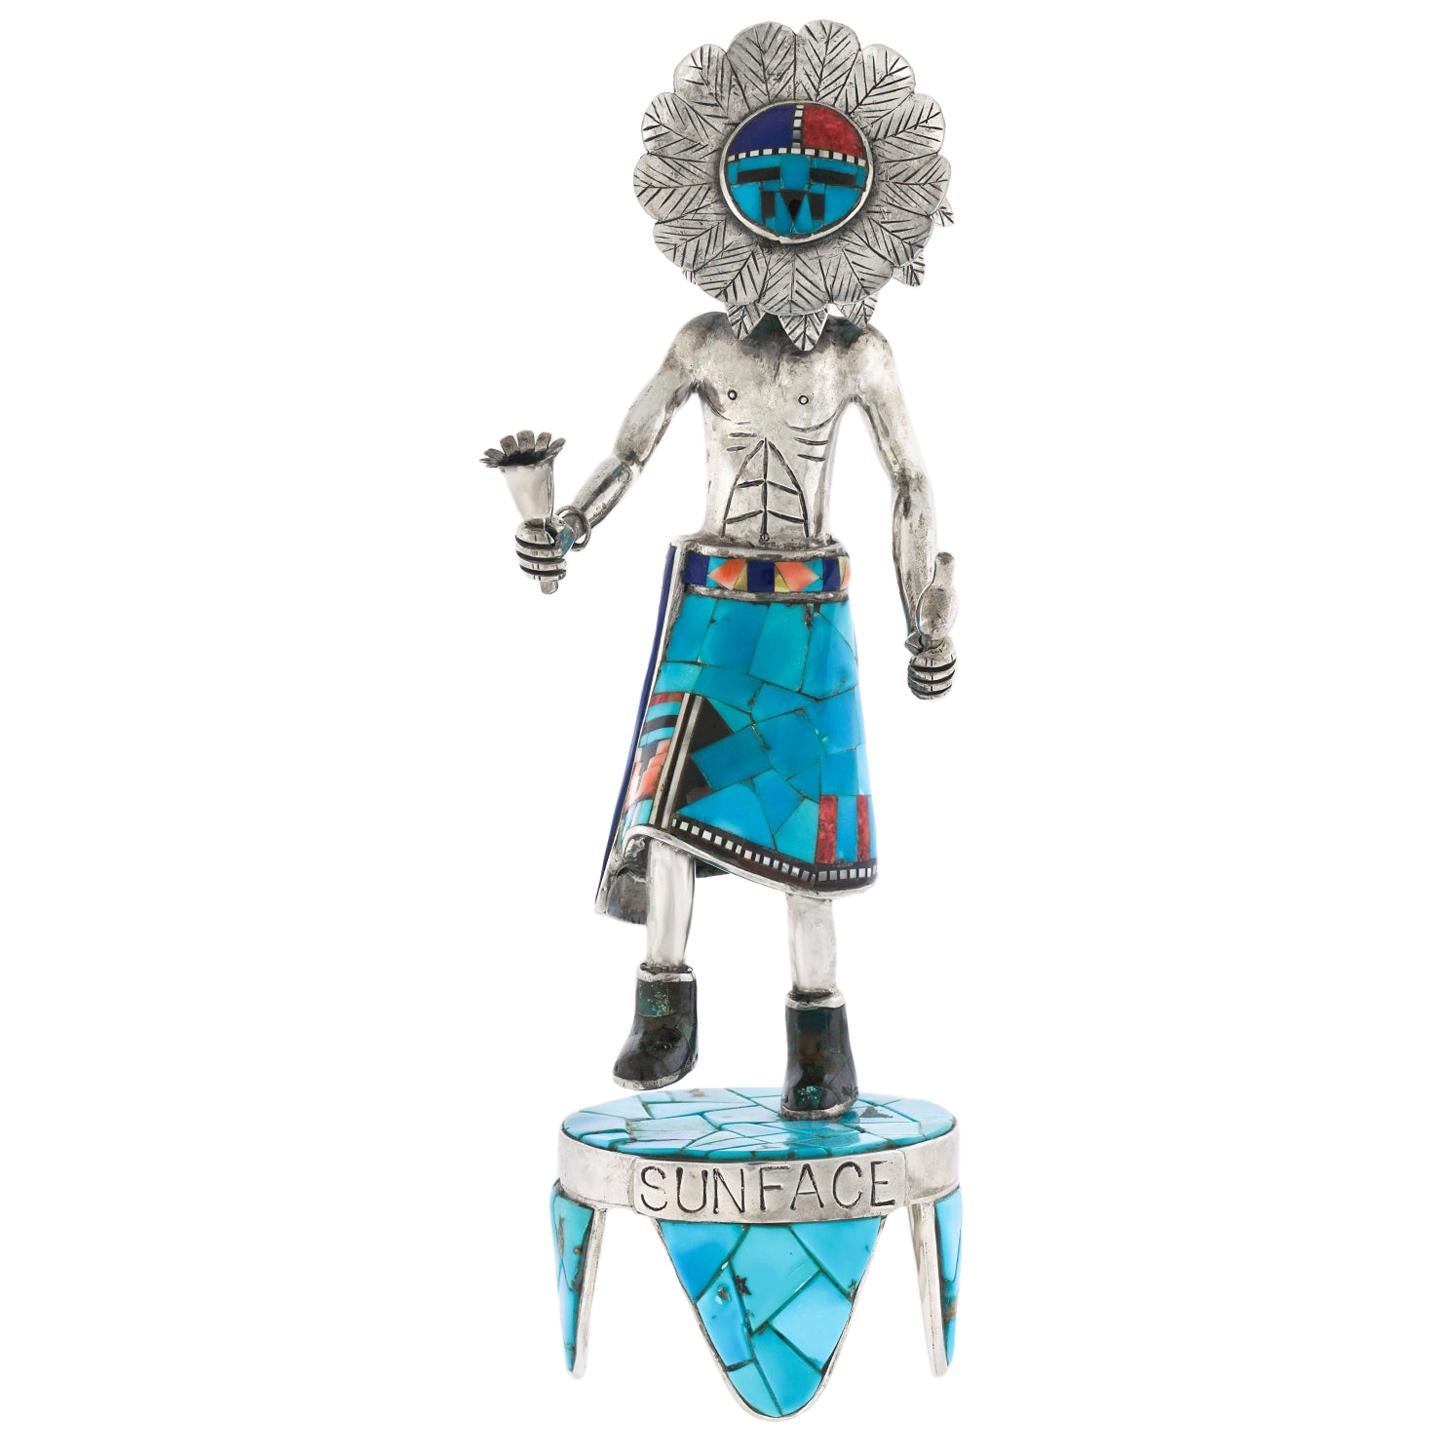 Sterling and Turquoise Navajo Sunface Dancer